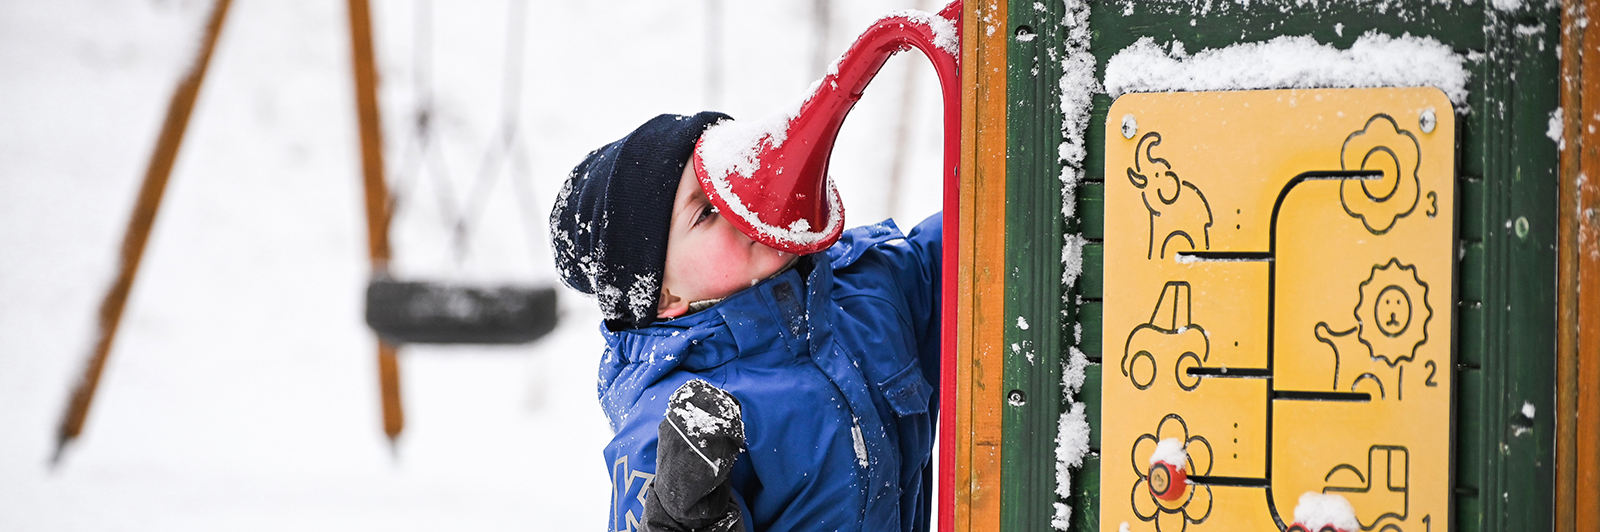 a young boy in a hat and gloves, stands in a snowy playground speaking into a talk tube